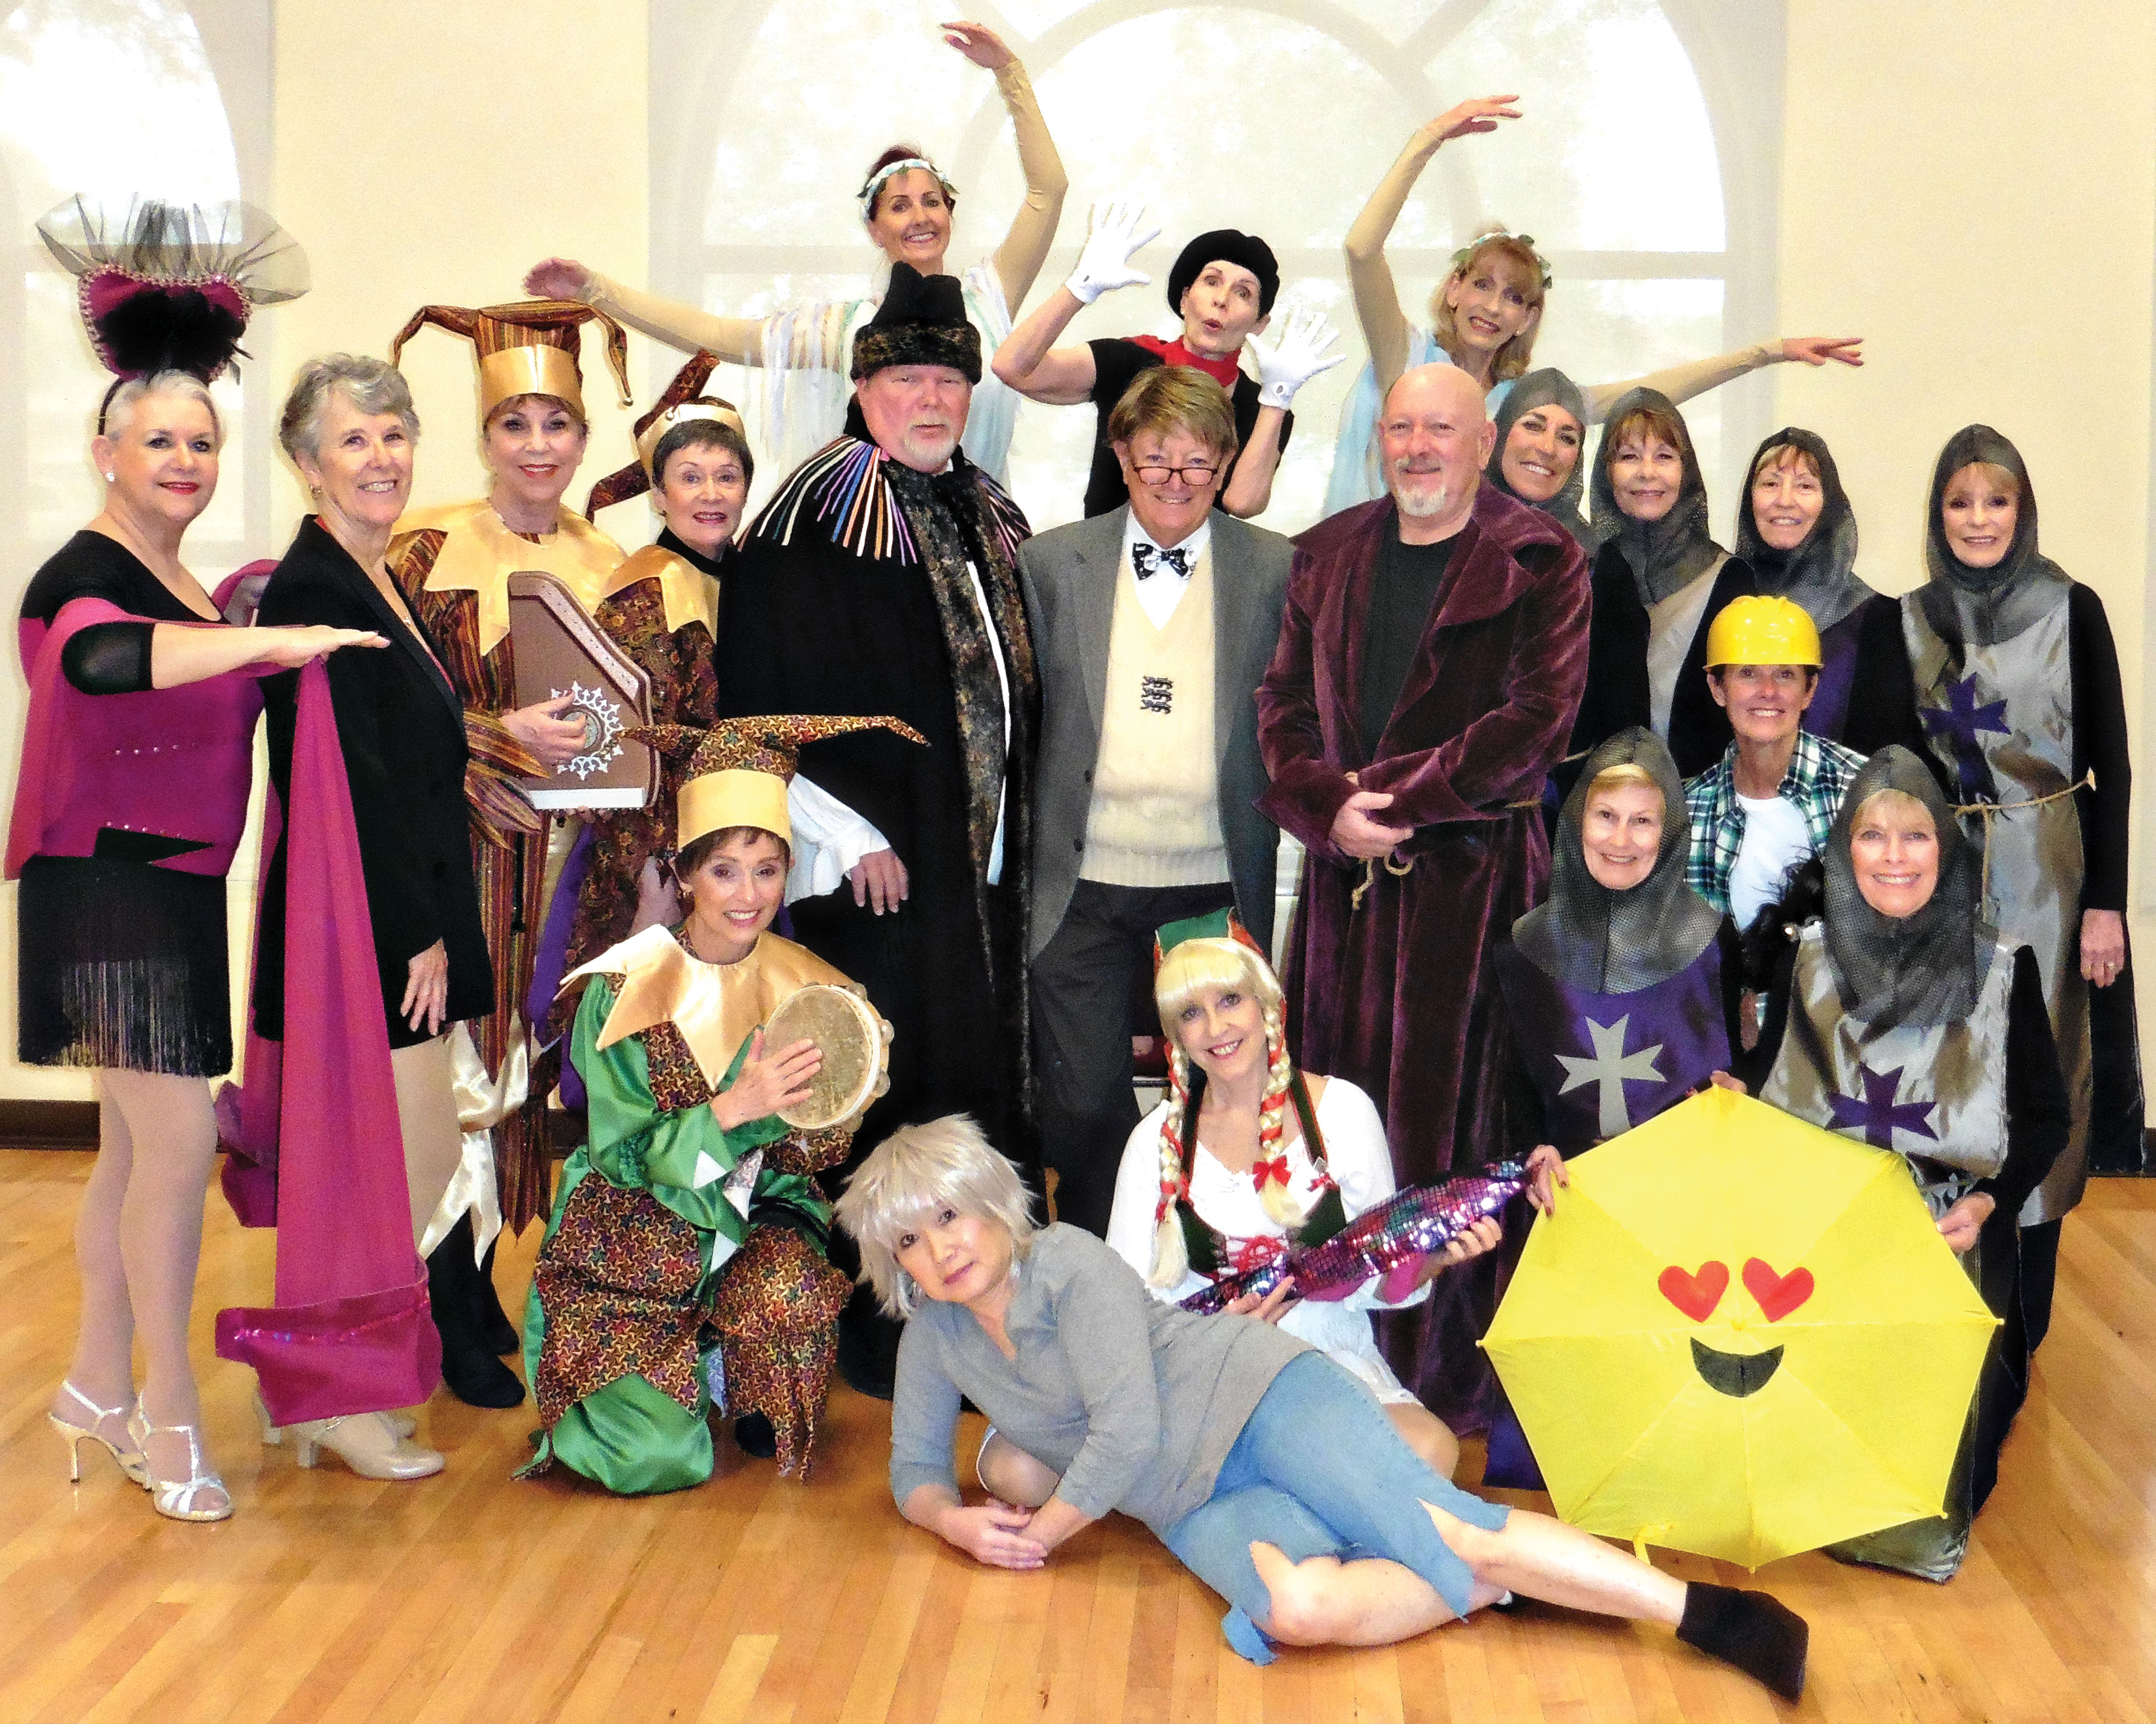 Some of the Spamalot crazy characters